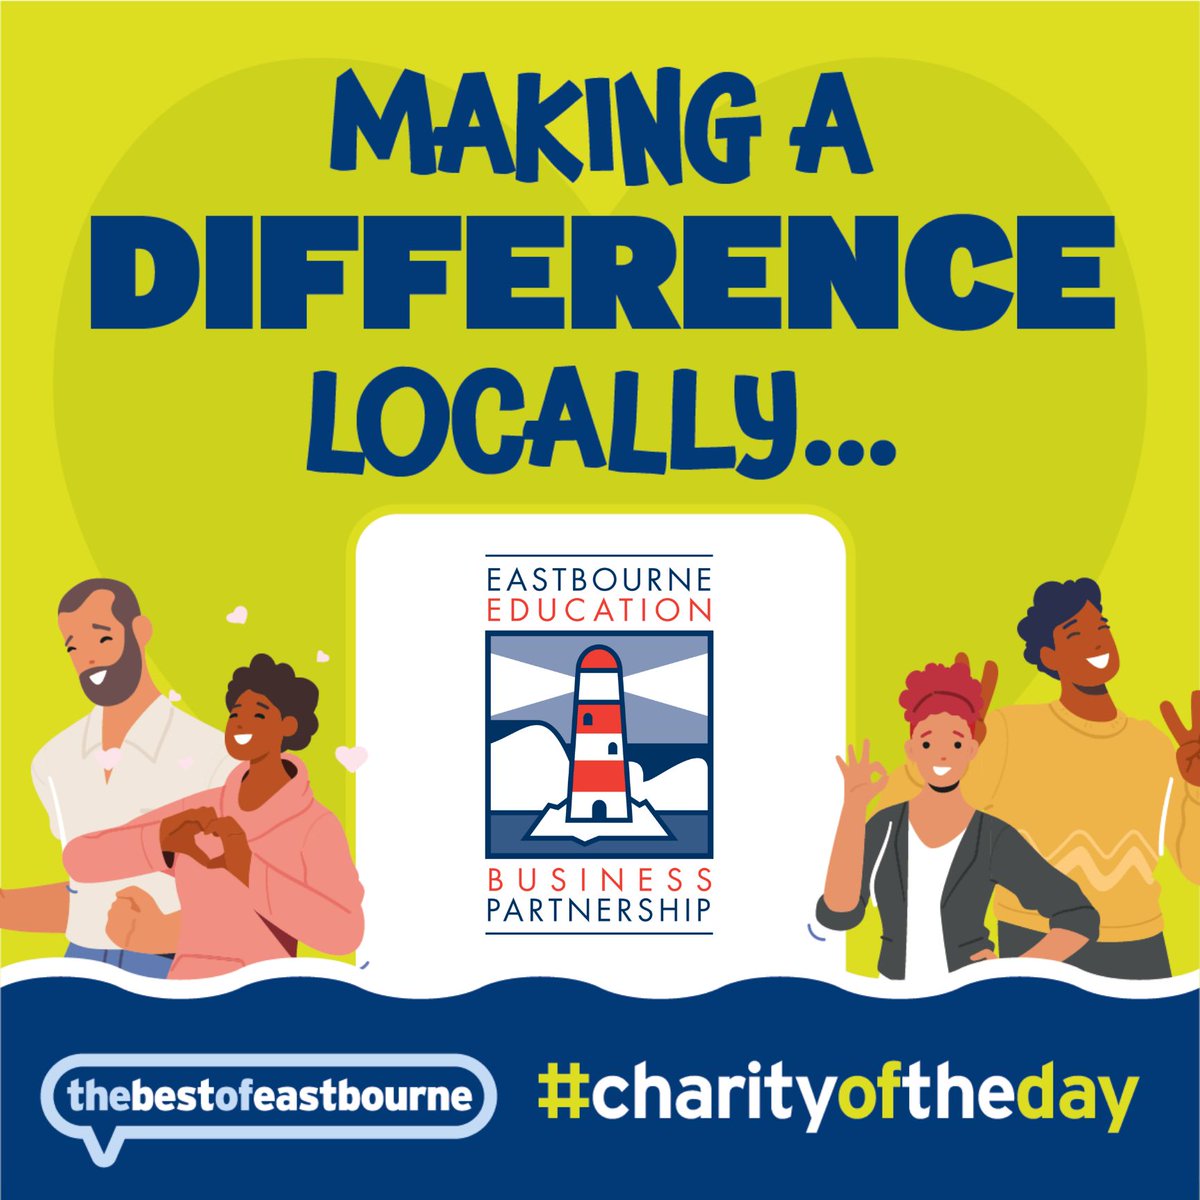 🤝 Making a difference locally 💙 Please show your support for @EastbourneEBP, you can find out more about this local charity in our Community Guide bit.ly/2RphjZZ #BestOfEastbourne #CharityOfTheDay #EastbourneCharity #EBcharity #EastbourneVolunteer